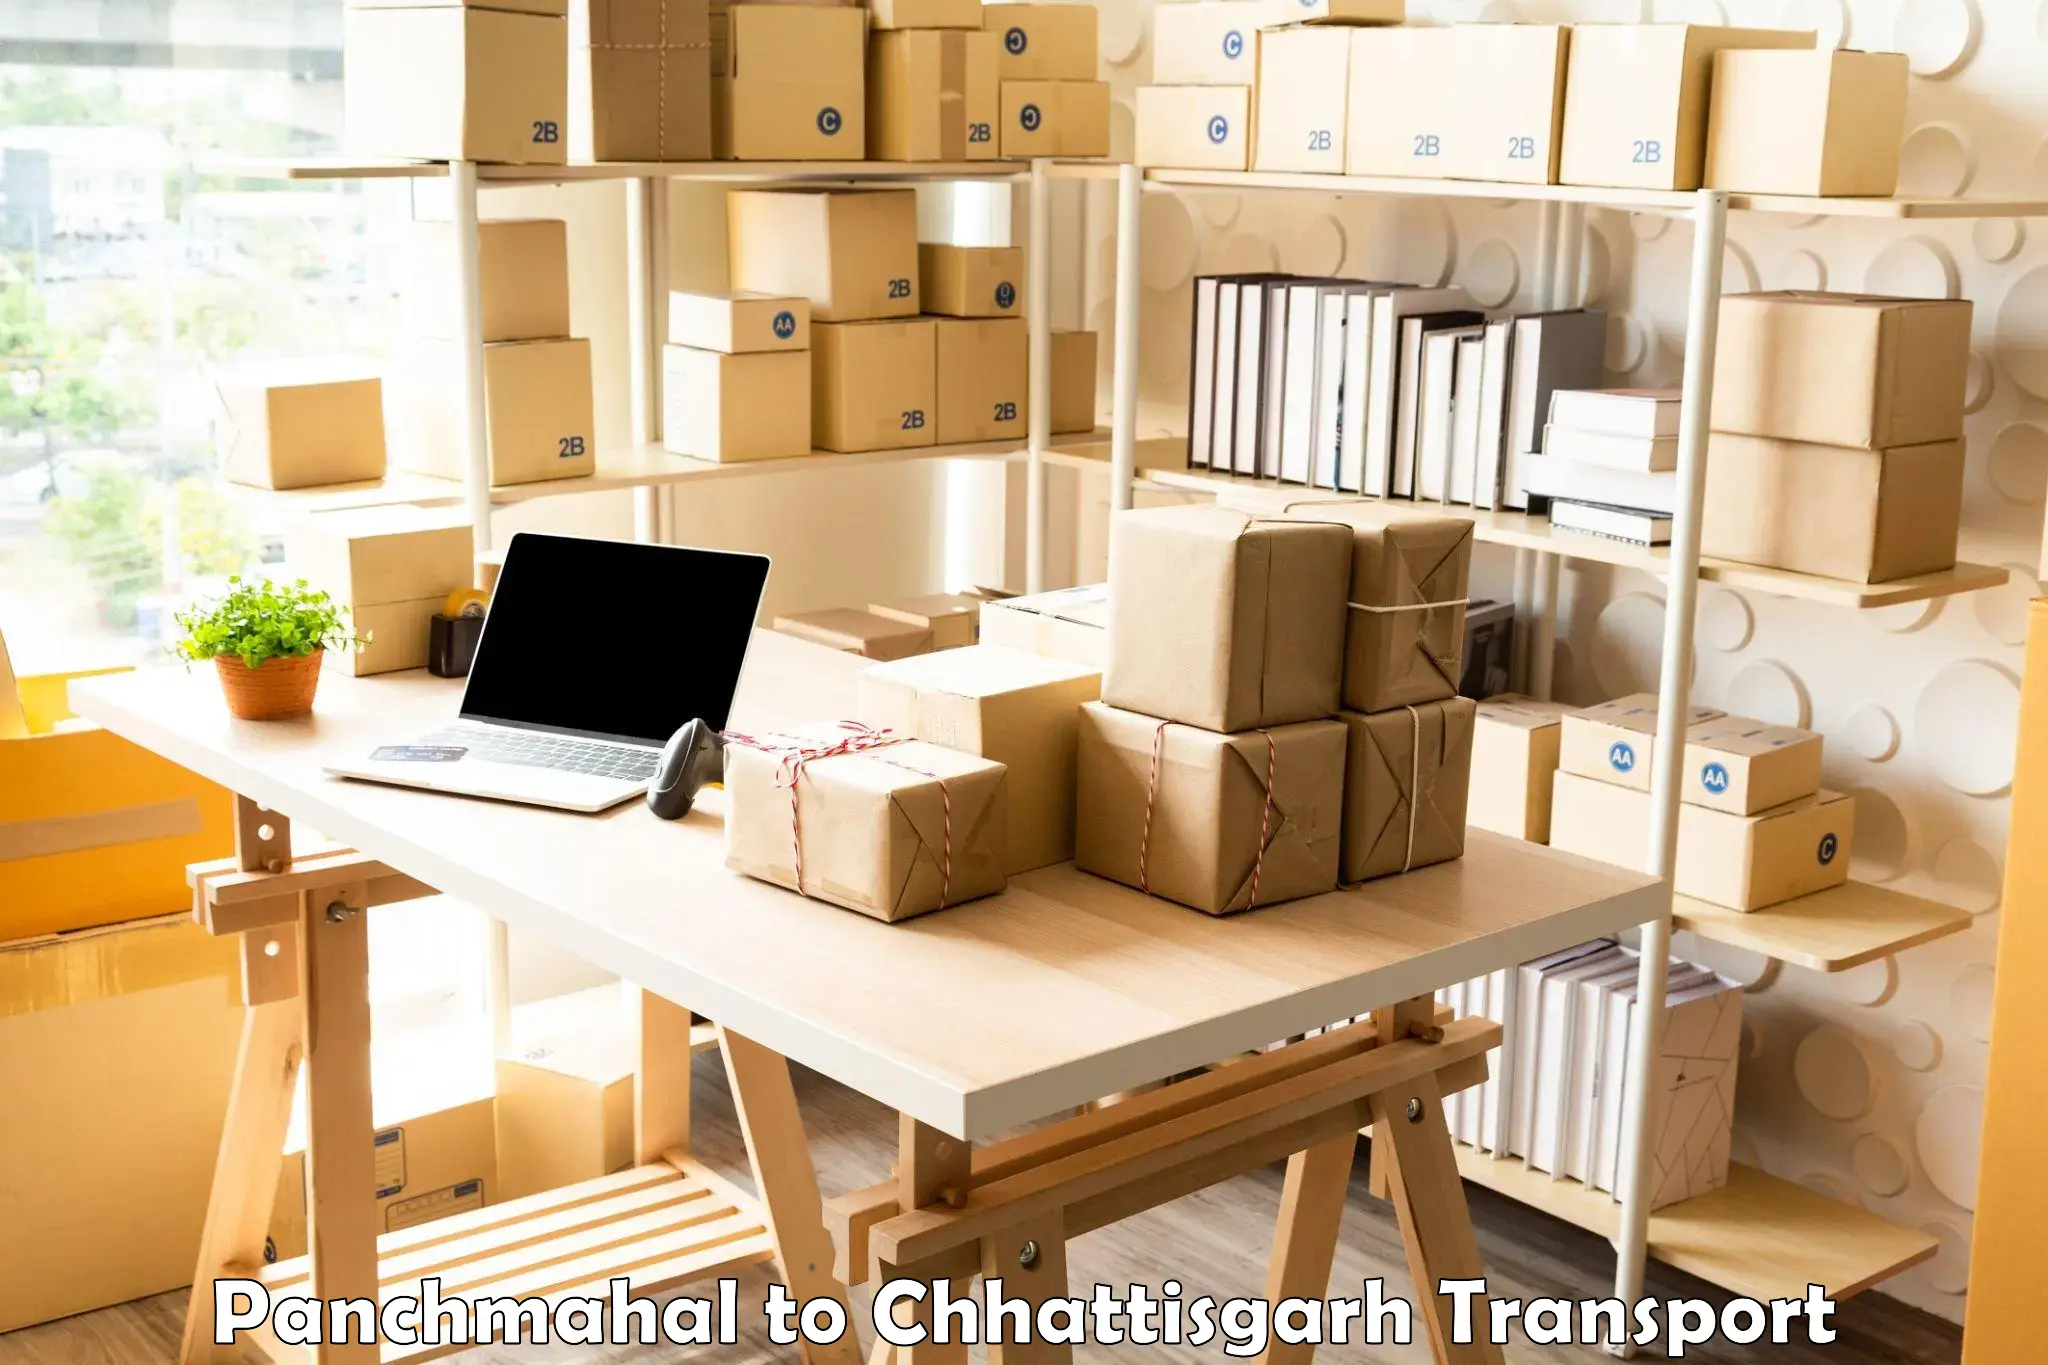 Goods delivery service Panchmahal to Raigarh Chhattisgarh